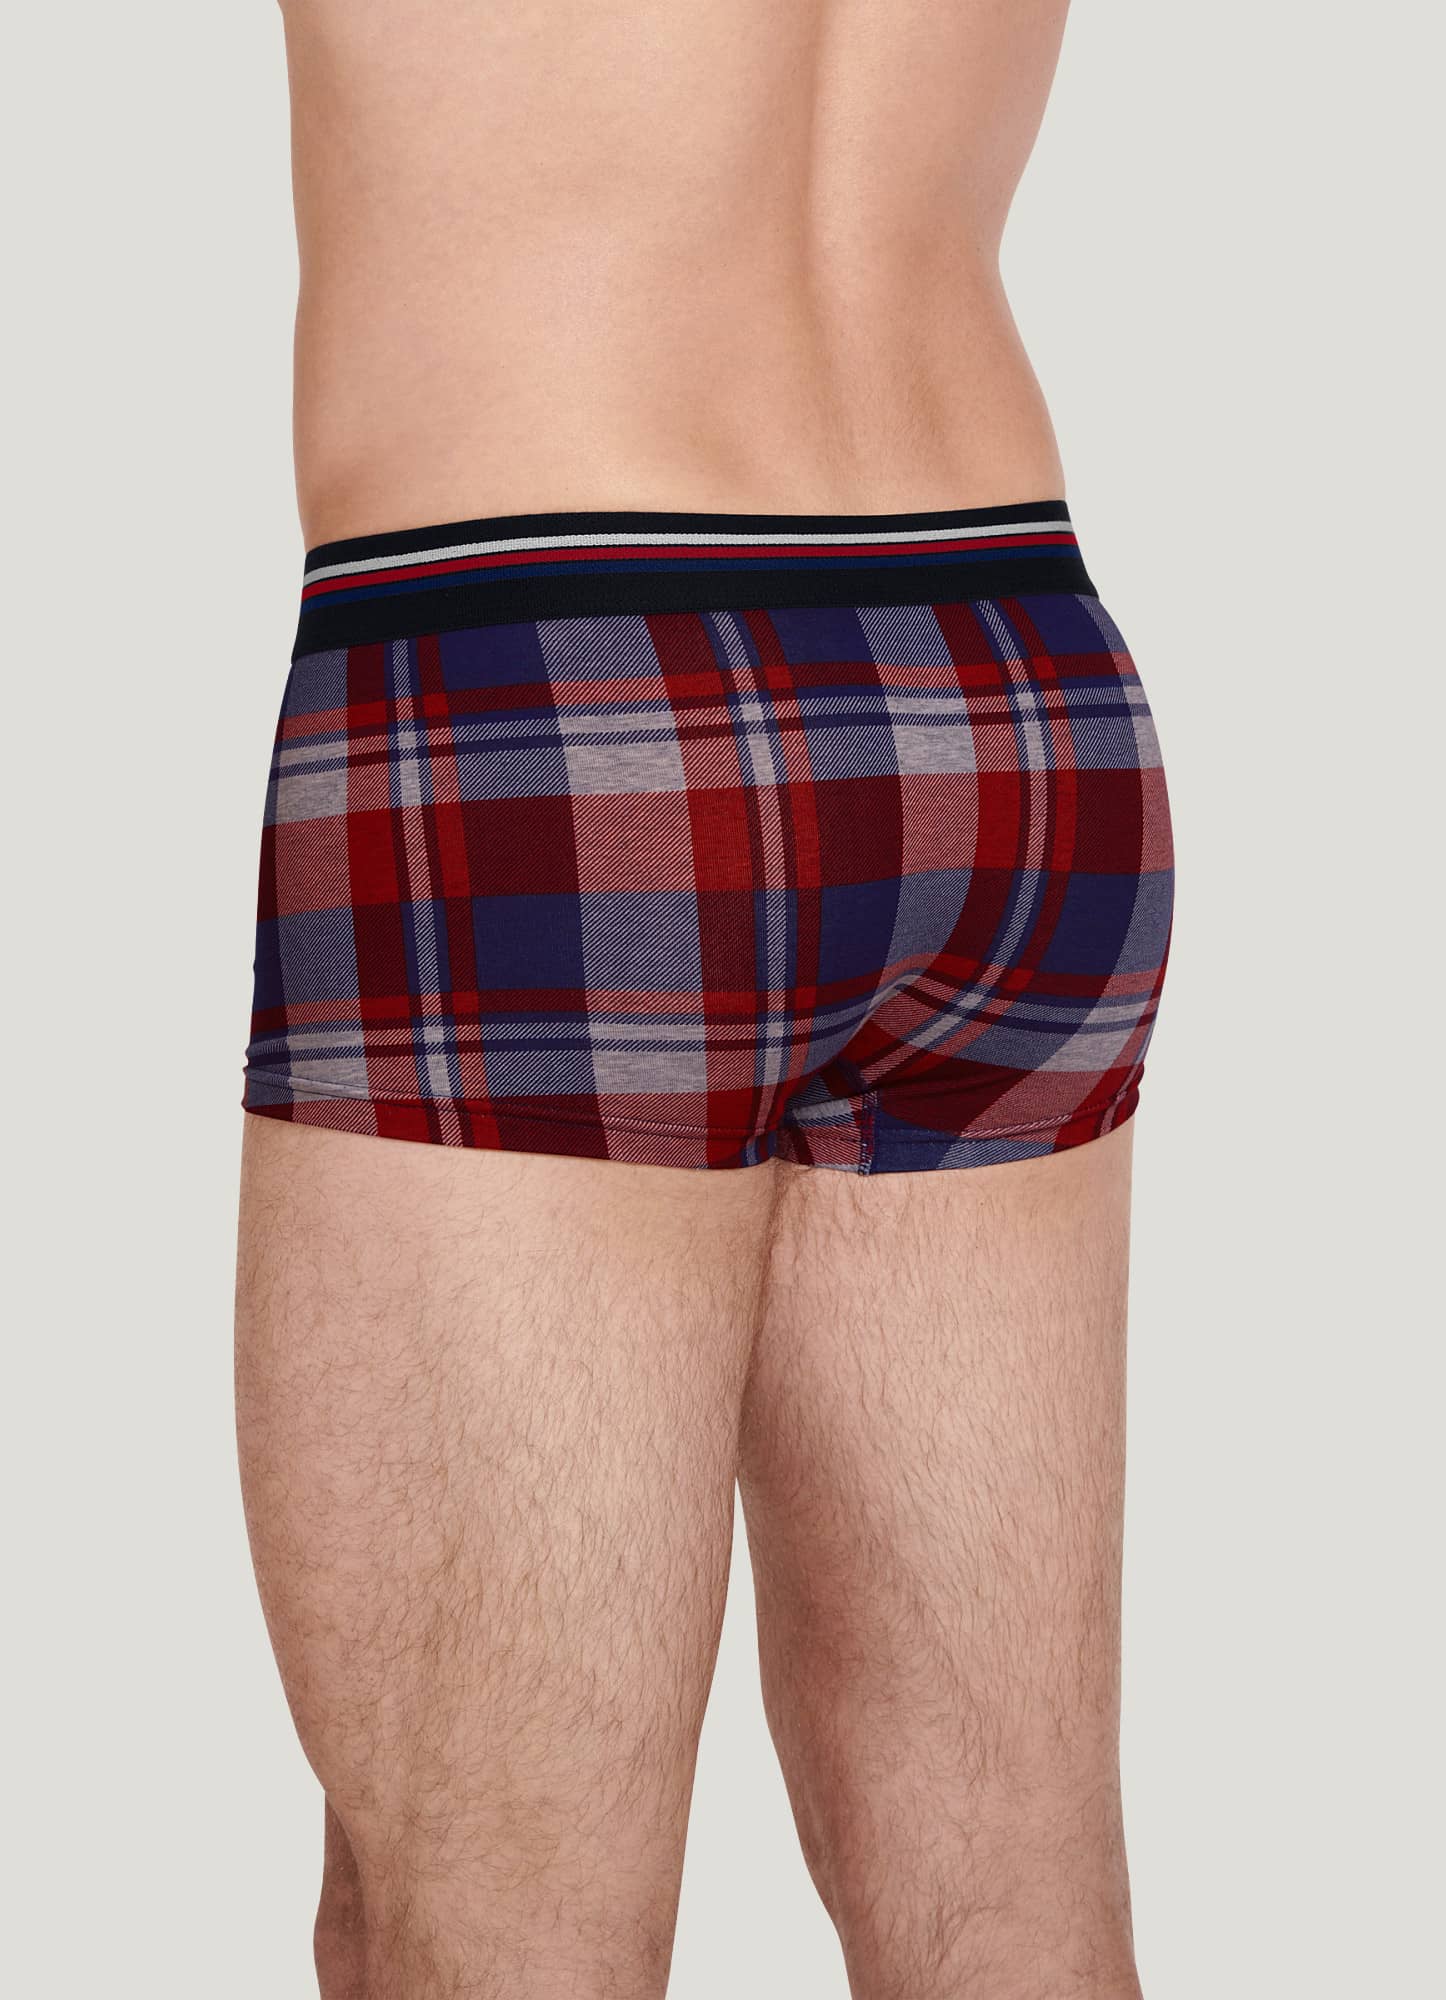 Buy Jockey Assorted Prints Boxer Shorts Pack of 2 - Style Number- US57 -  Multi-Color Online